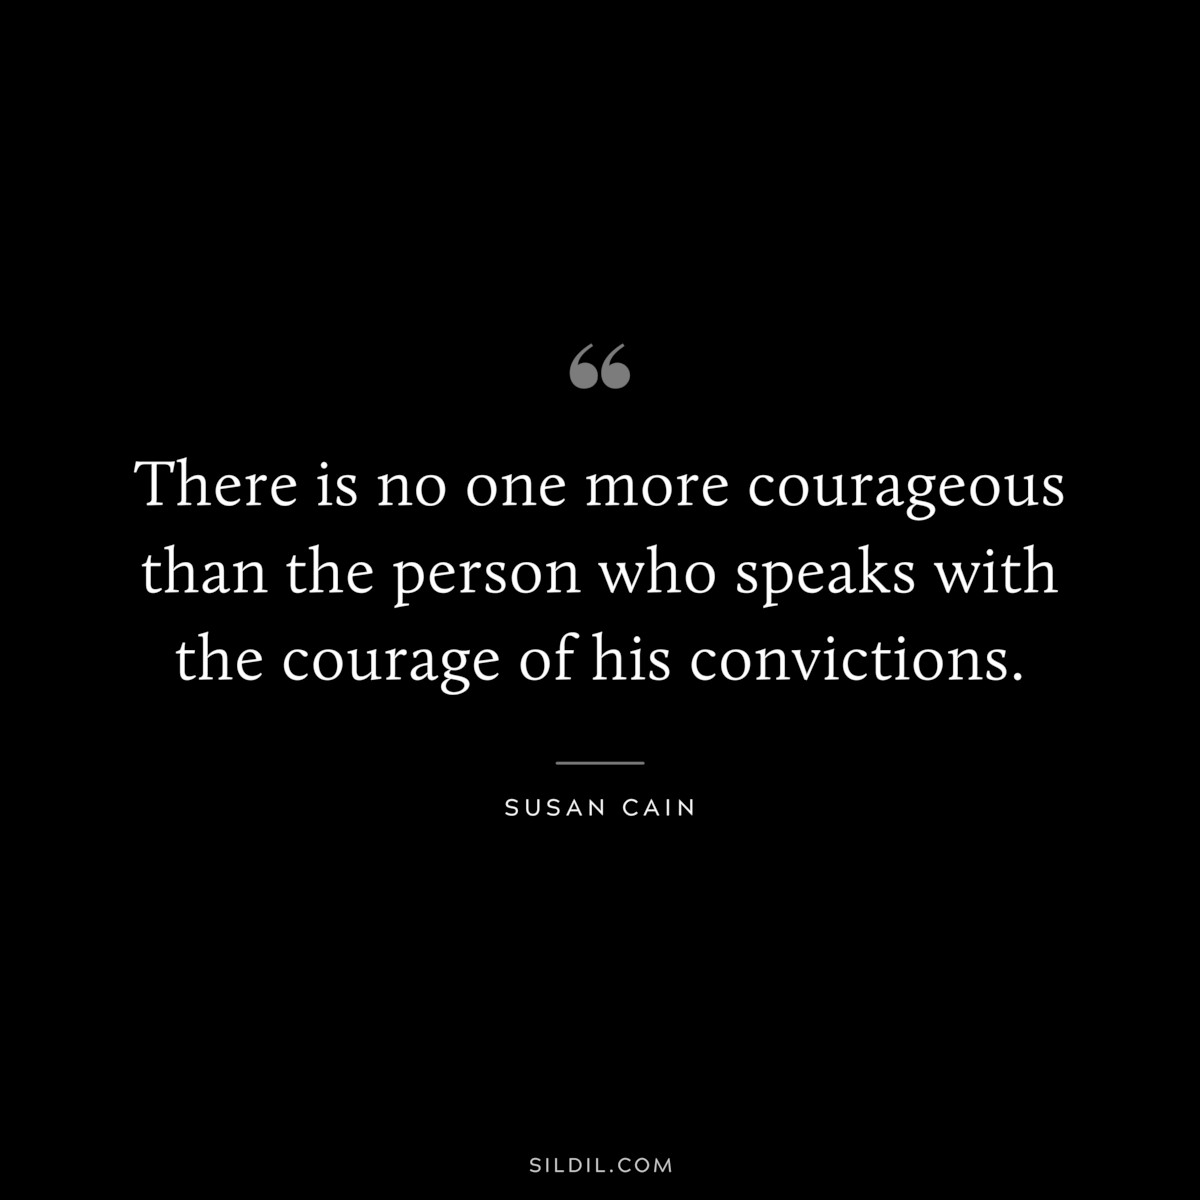 There is no one more courageous than the person who speaks with the courage of his convictions. ― Susan Cain